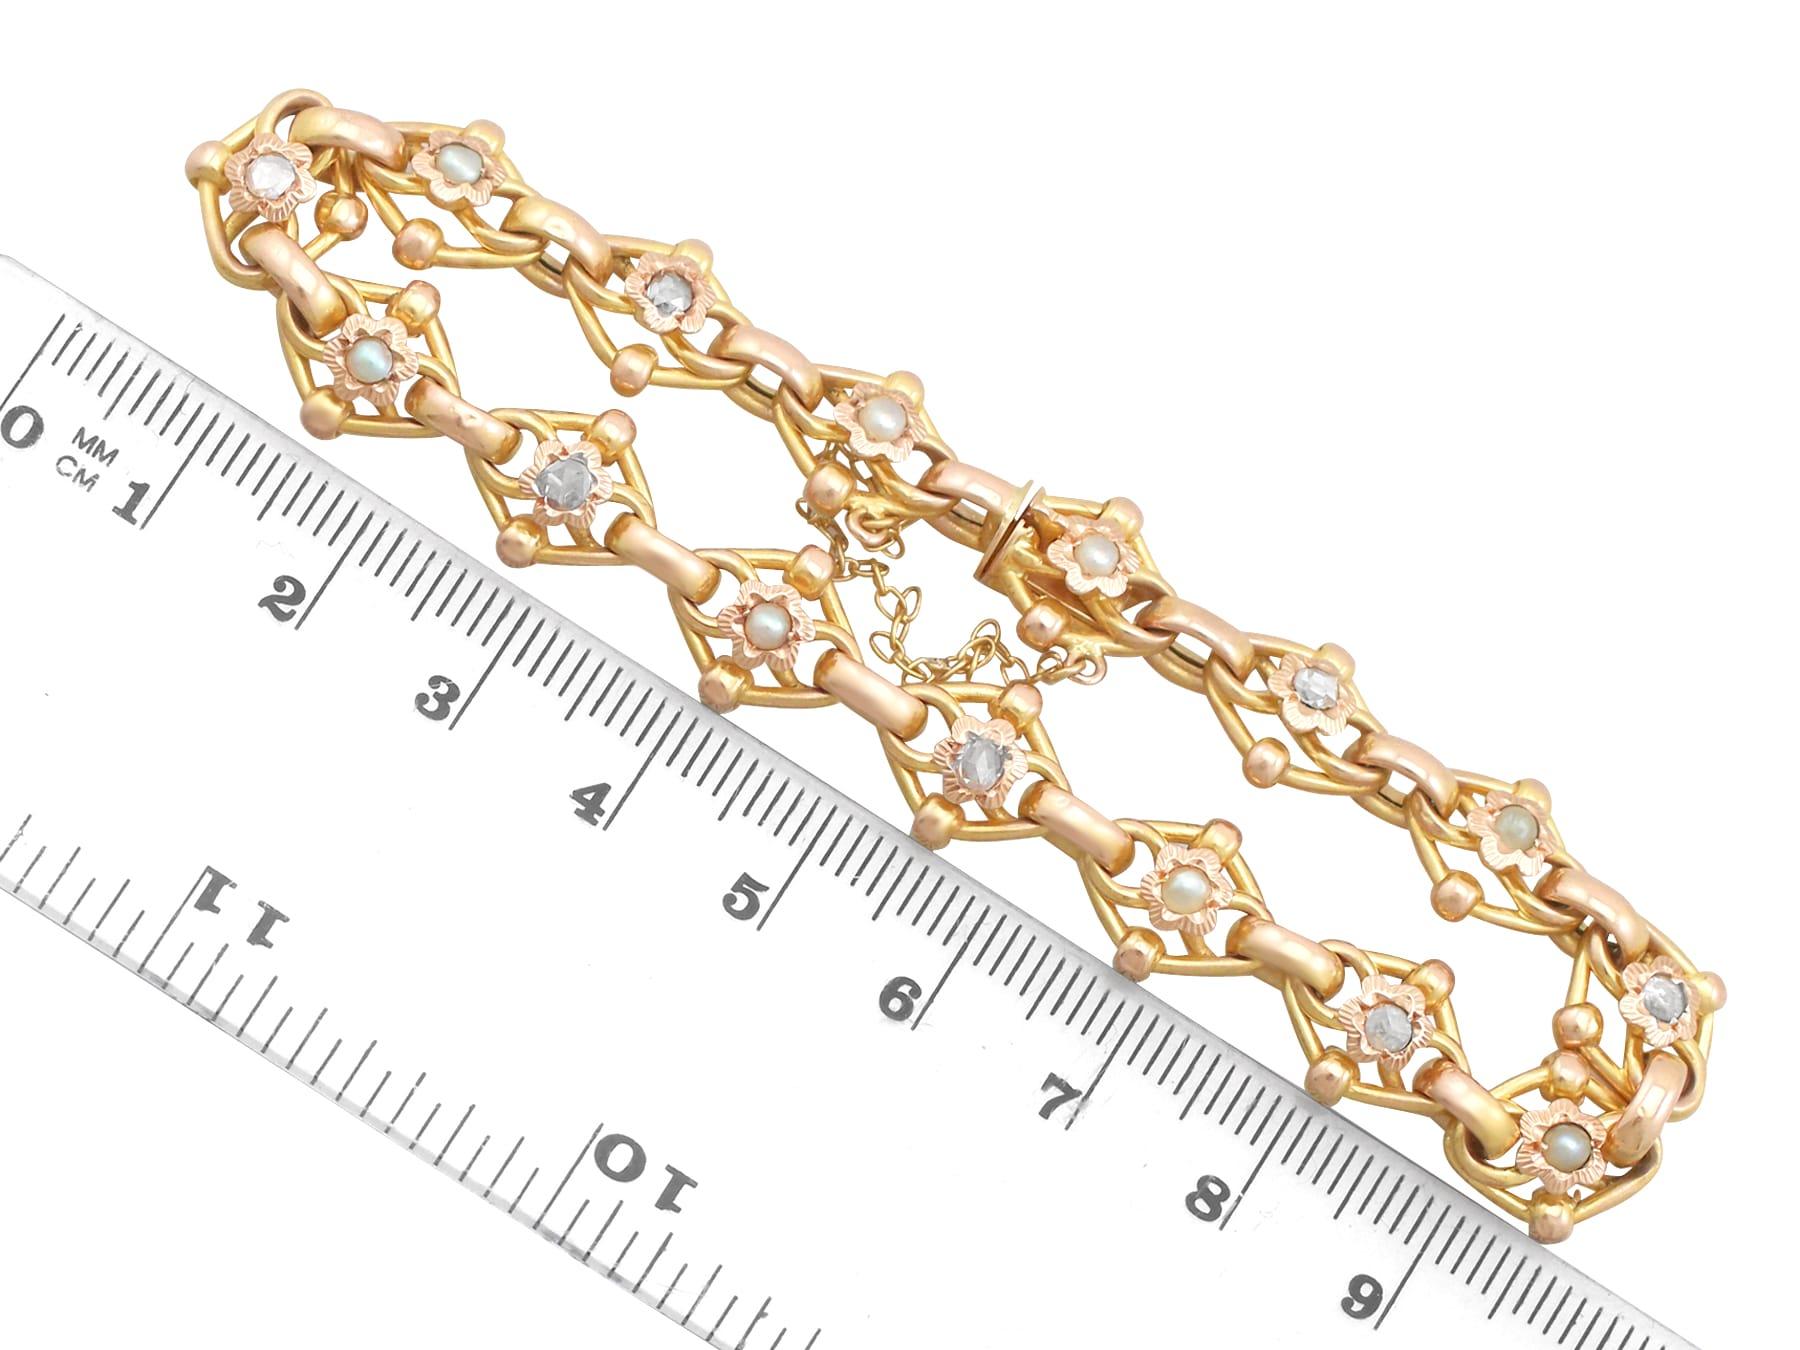 1910s 2.61 Carat Diamond and Seed Pearl Yellow Gold Bracelet For Sale 3